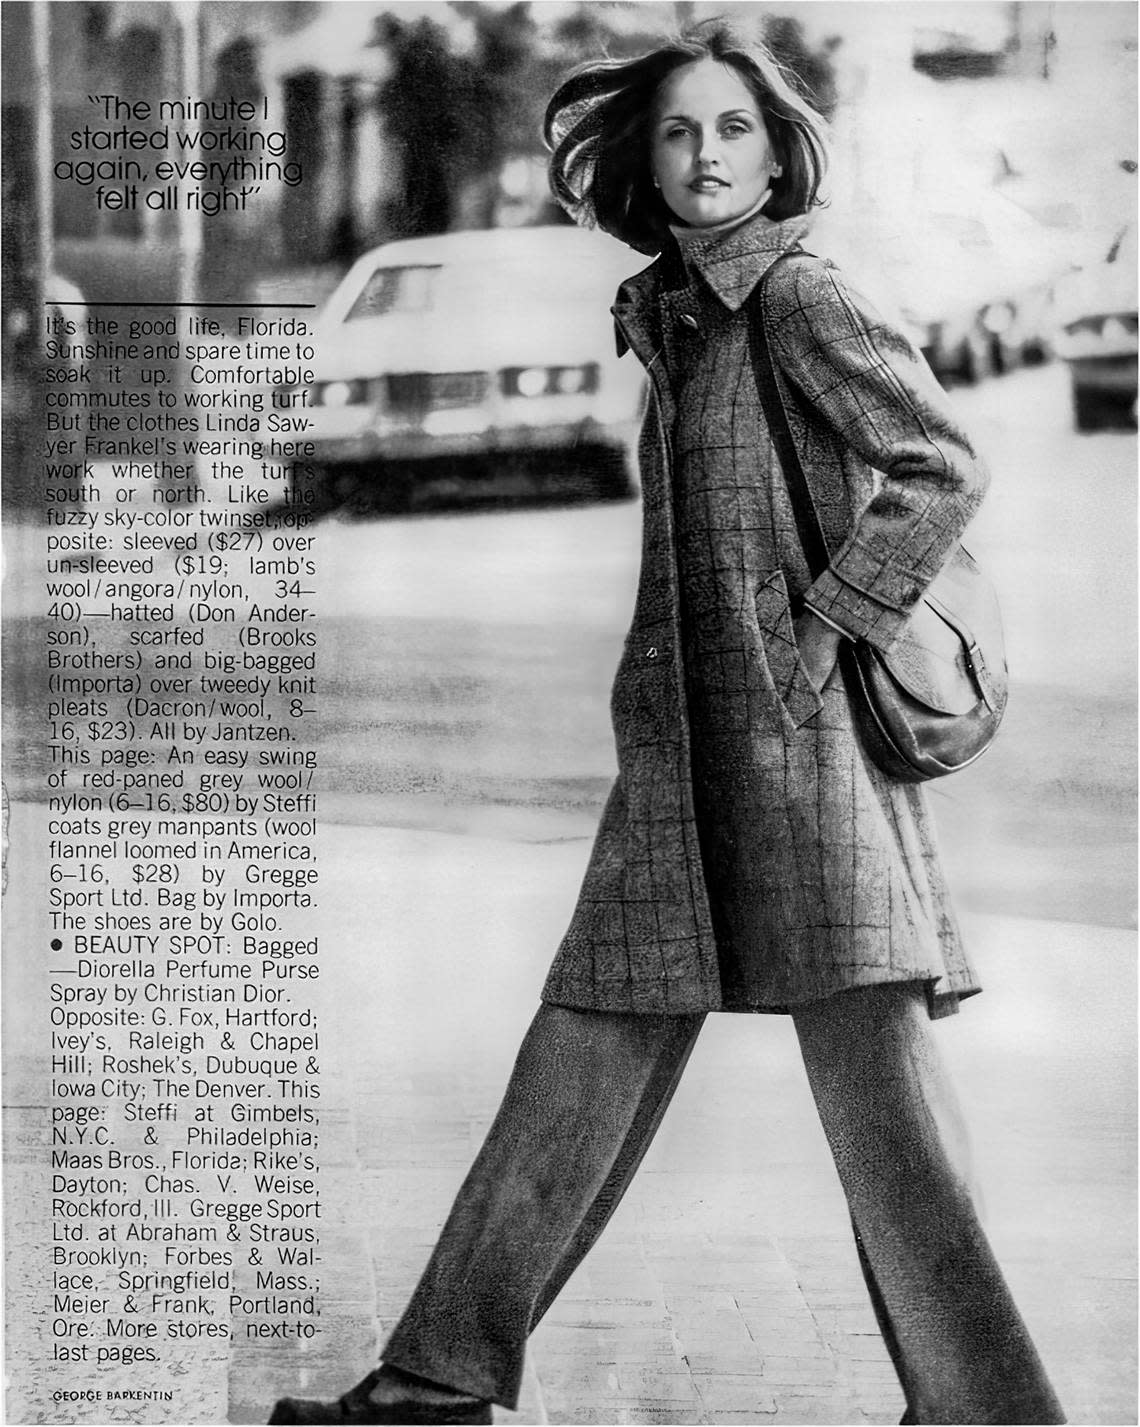 Linda Frankel, who used to be an associate editor at Vogue, was known for her style. She was profiled in Mademoiselle magazine.